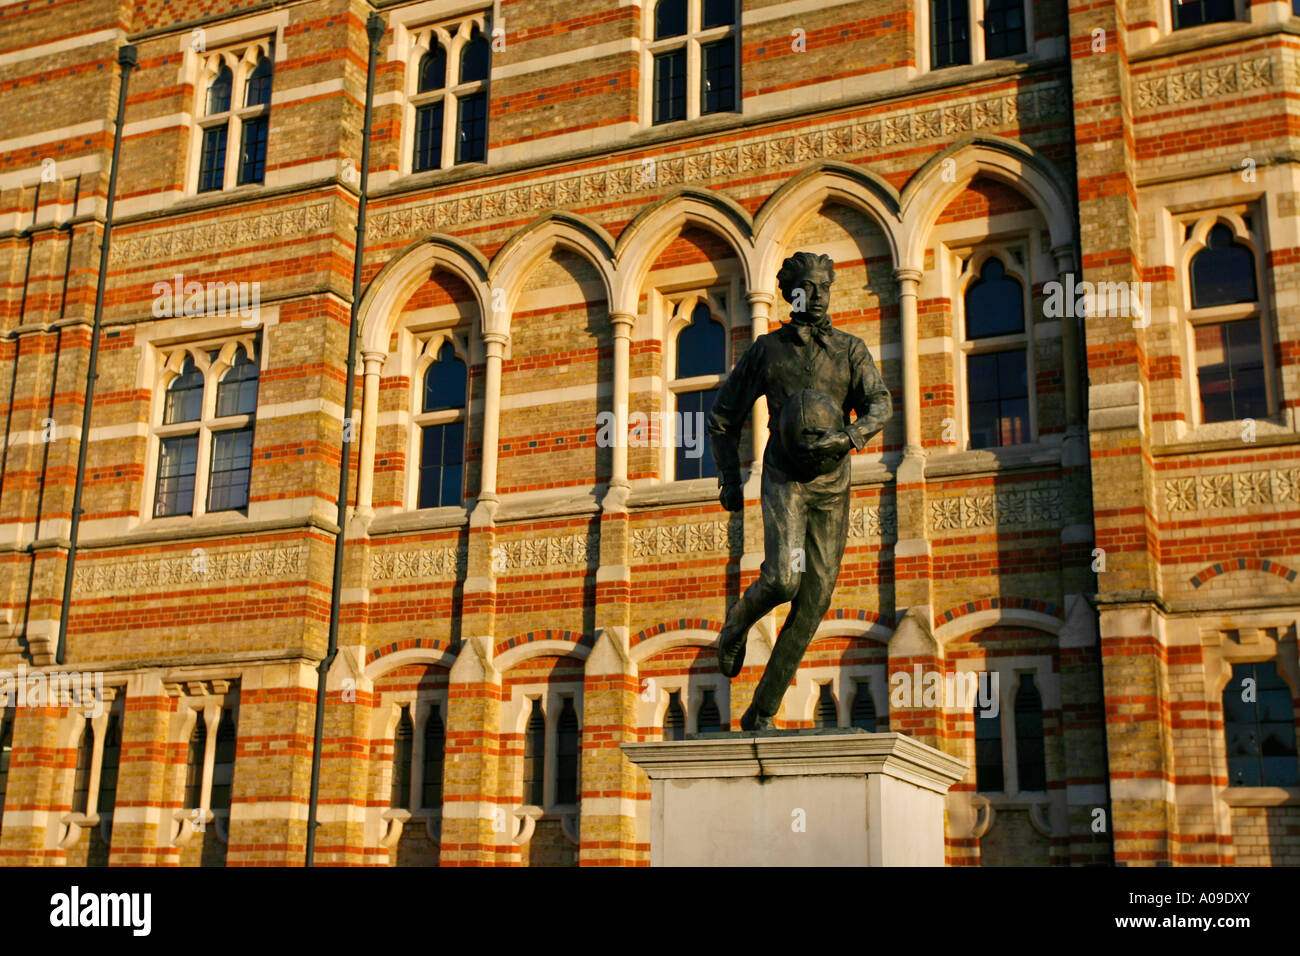 Statue of William Webb Ellis outside Rugby School Rugby Warwickshire England UK Stock Photo